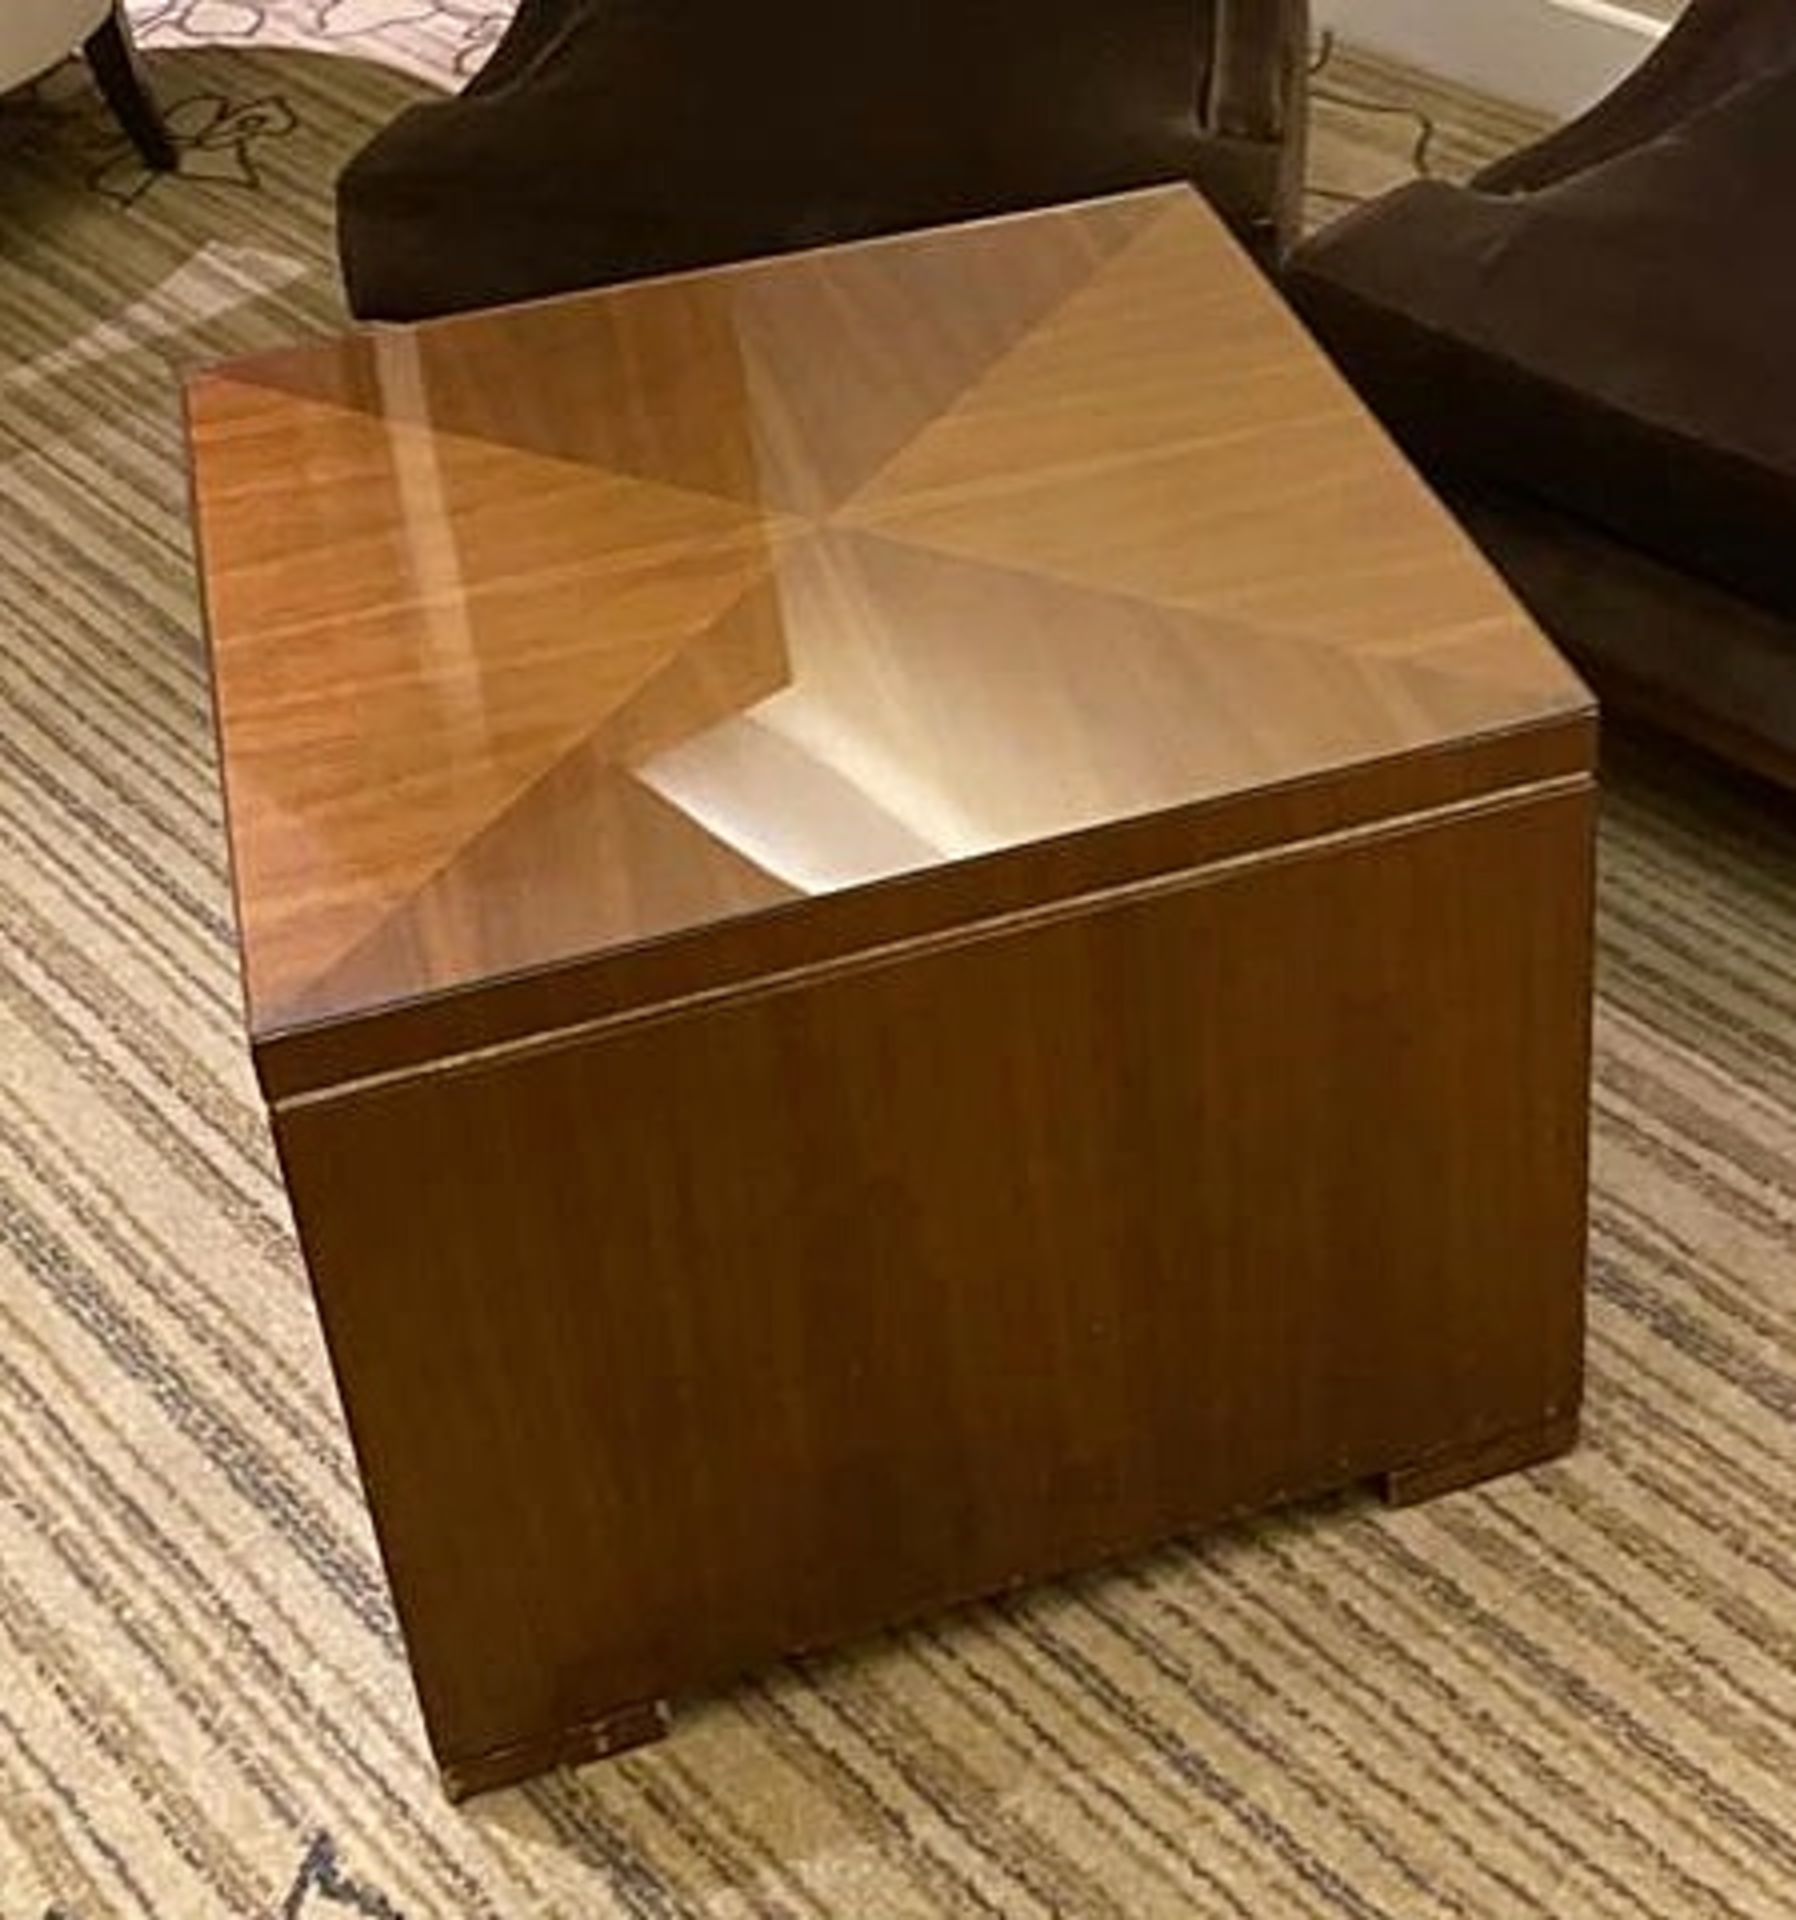 1 x Solid Wood Glass-topped Cube Coffee Table With Marquetry Detail On Top - Recently Procured - Image 2 of 3